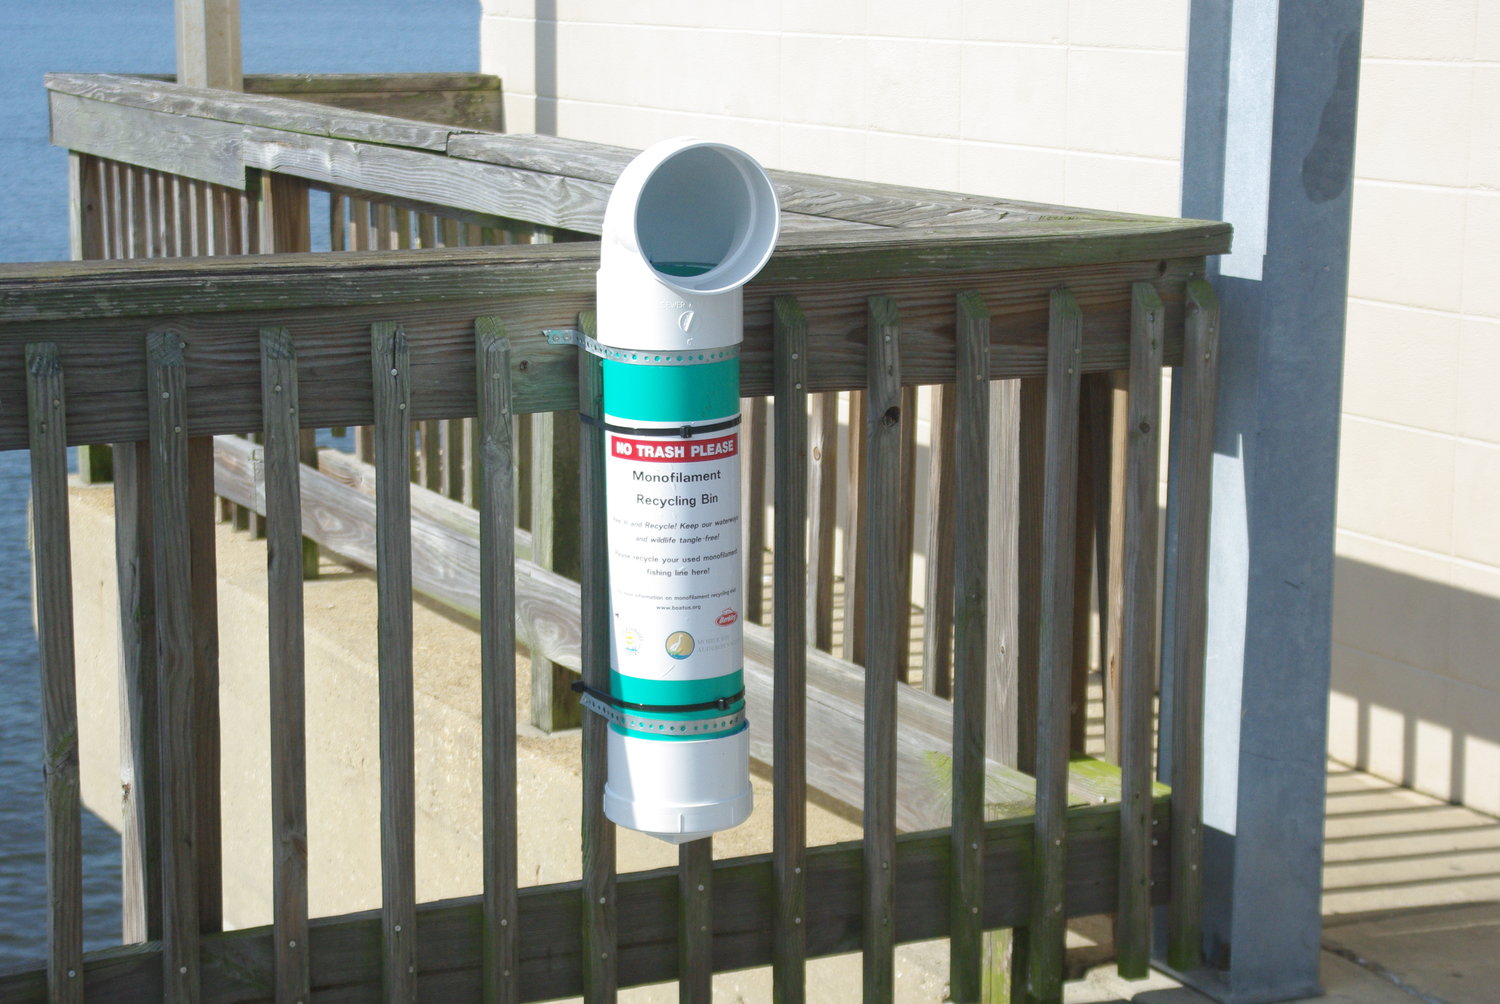 Fishing line recycling containers installed on Fairhope Pier